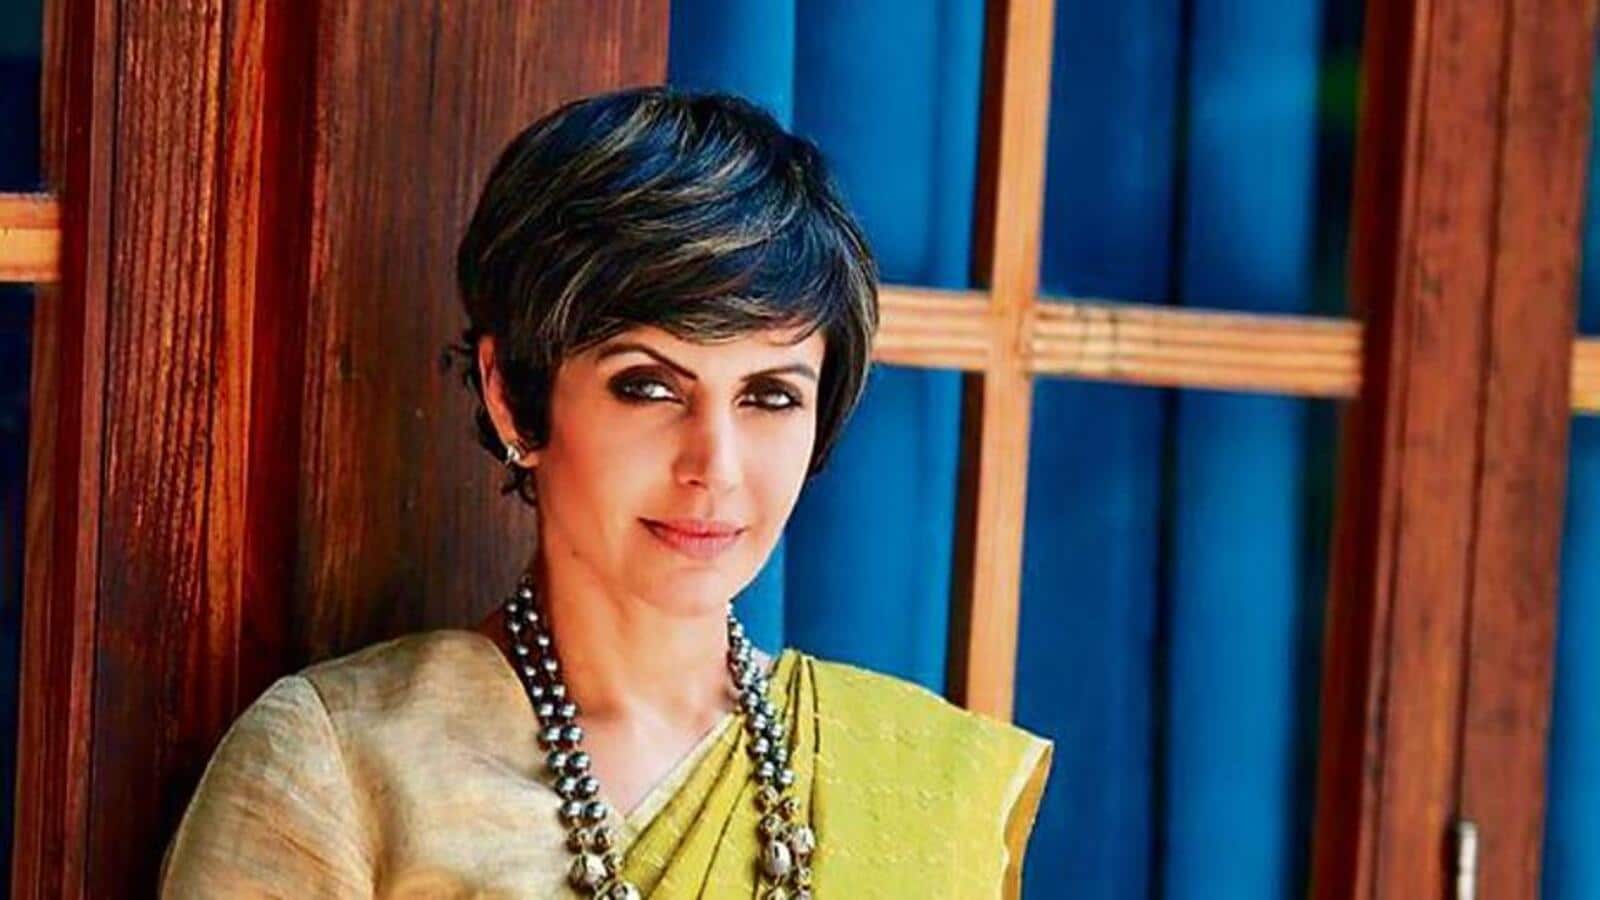 Mandira Bedi: Starting 2023 with a reality TV show, now hoping to say yes to fiction projects